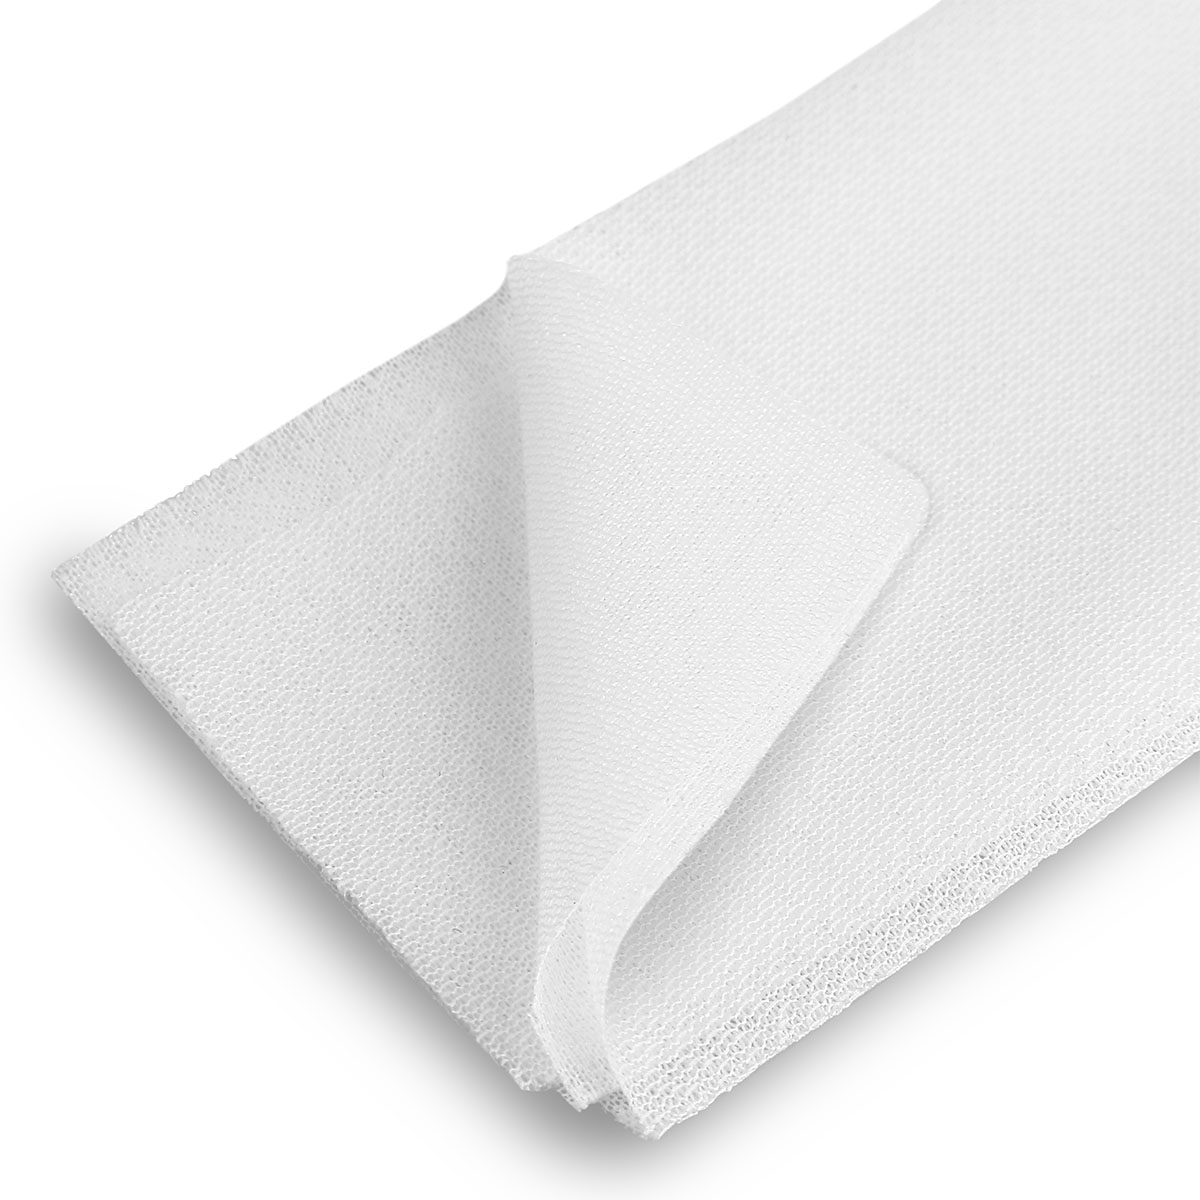 Entoilage thermocollant : maille stretch blanc pour jersey - Mercerine